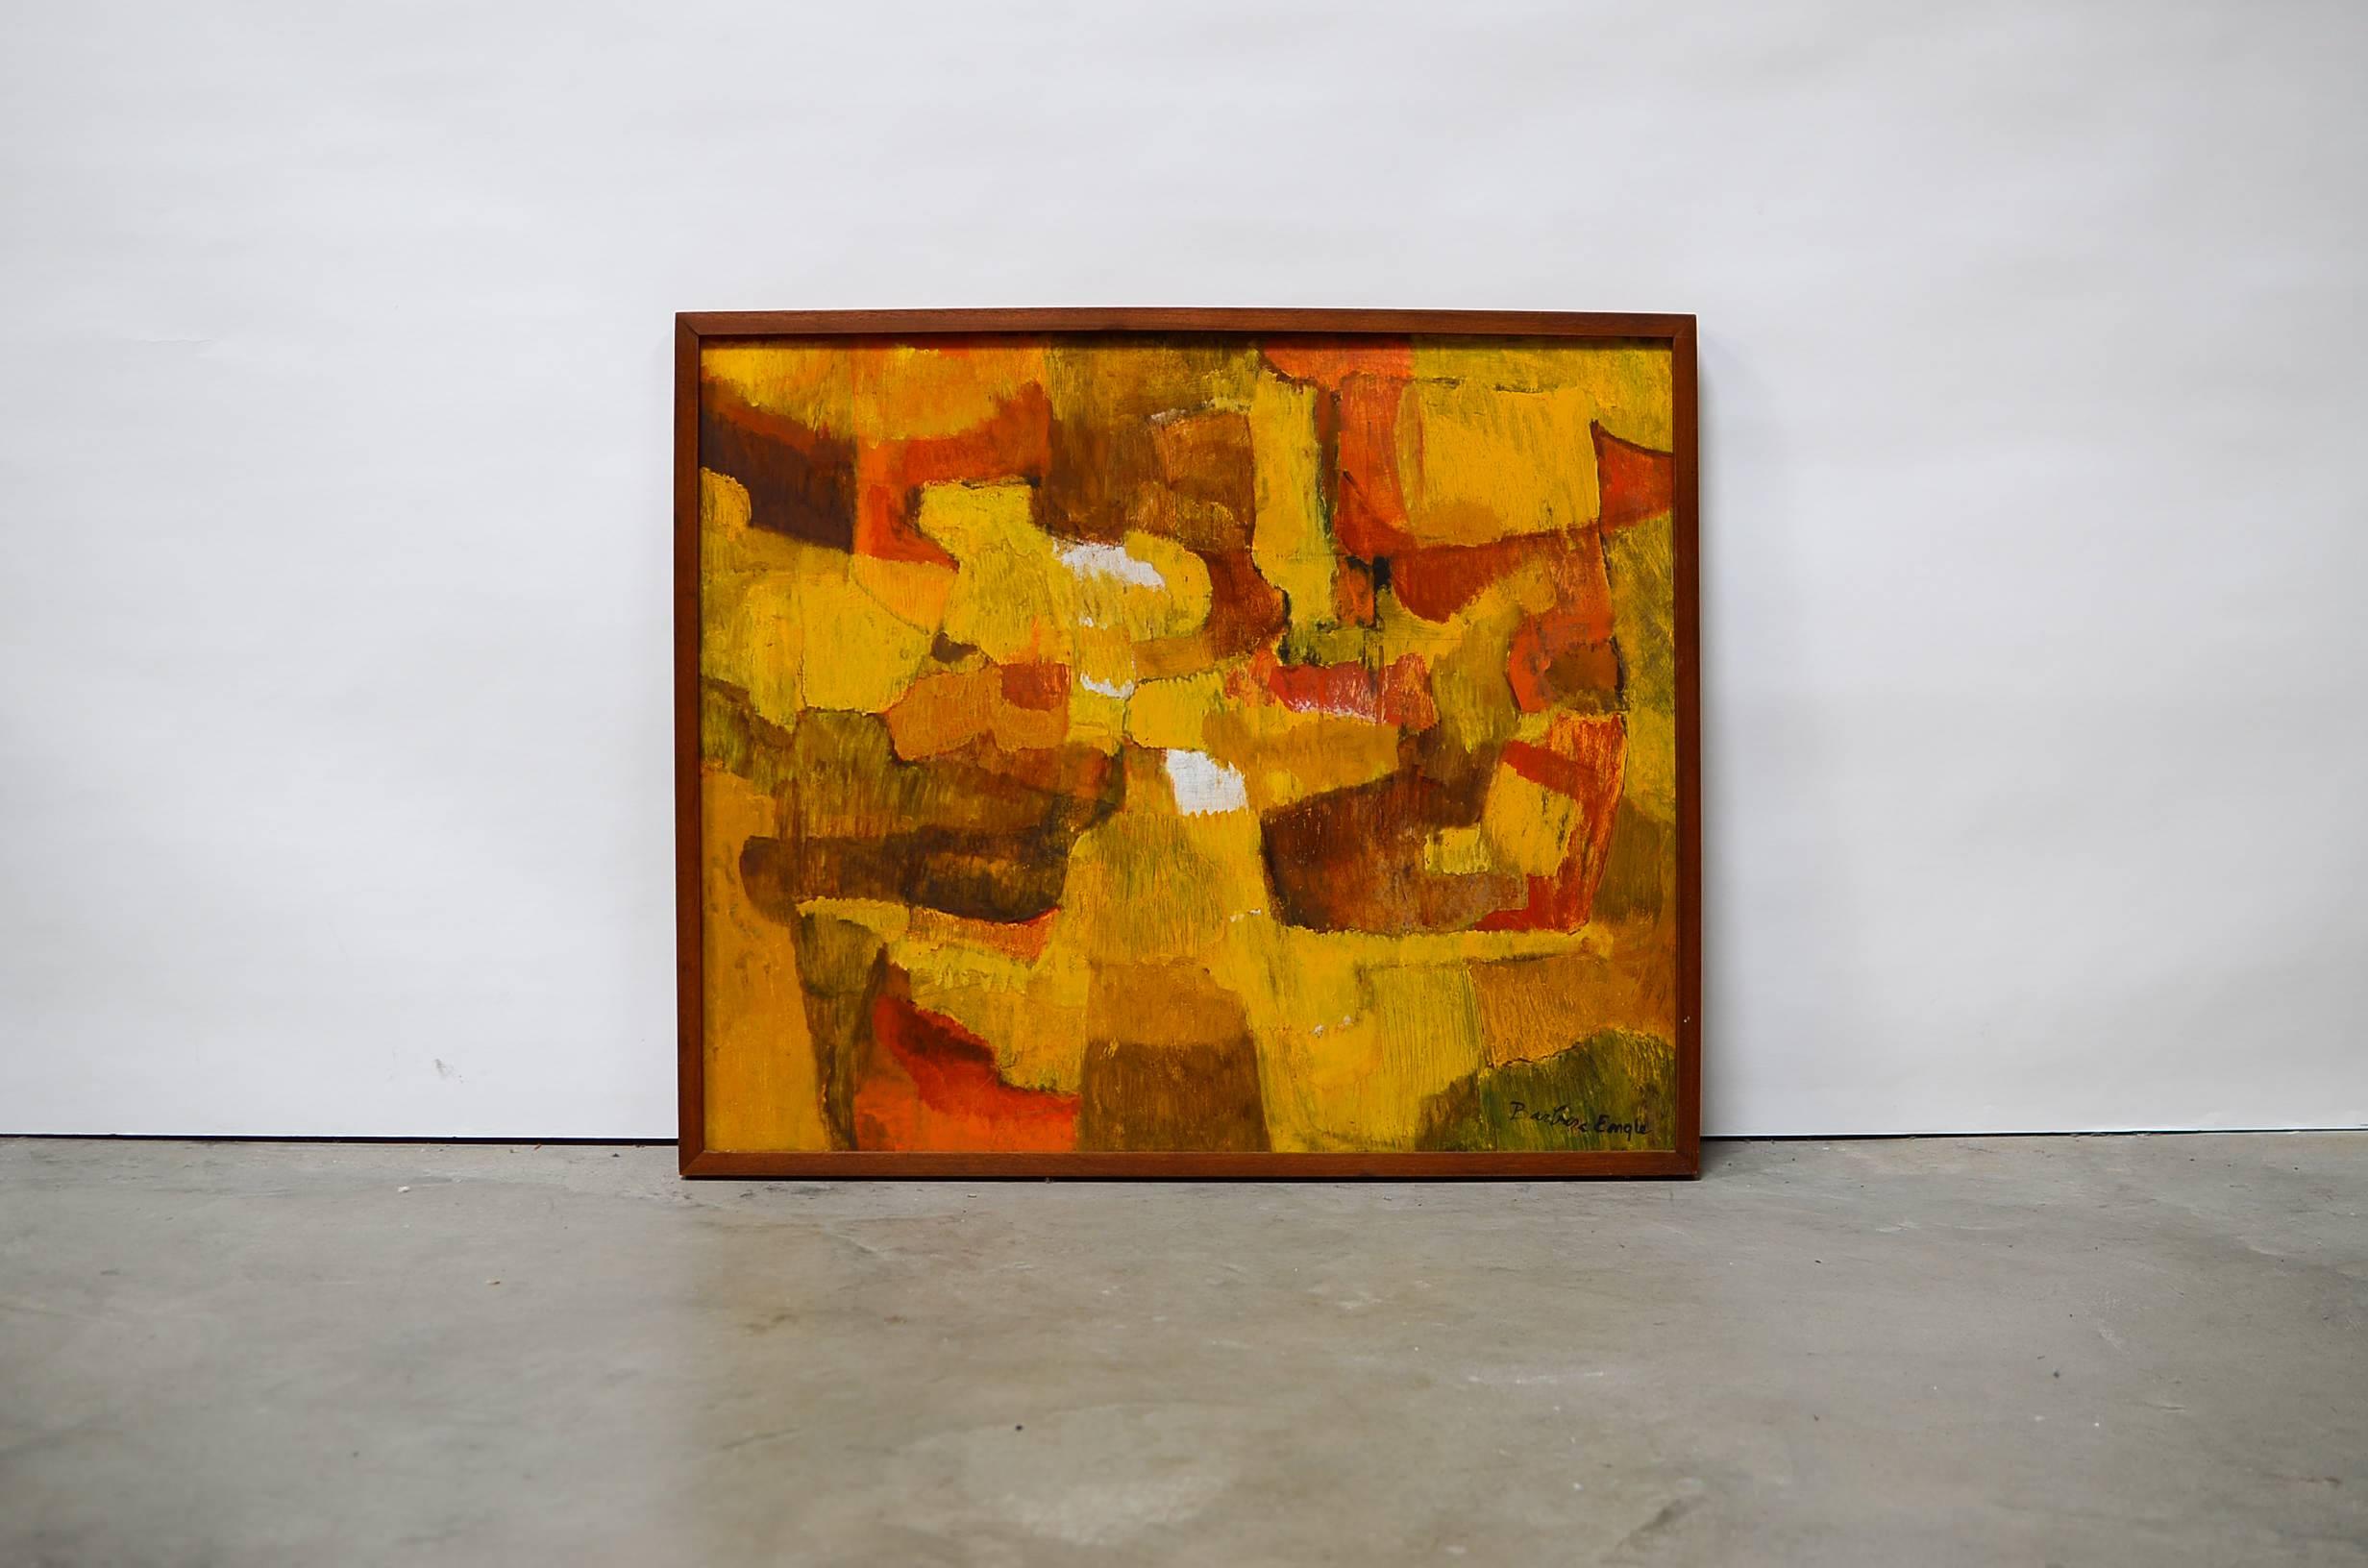 Framed oil on board, beautiful abstract in warm tones, by Barbara Engle (American, 20th century).

An active member in the Hawaii arts Community for over forty years, Barbara Engle served as President of the Hawaii Artist's League, helped to found